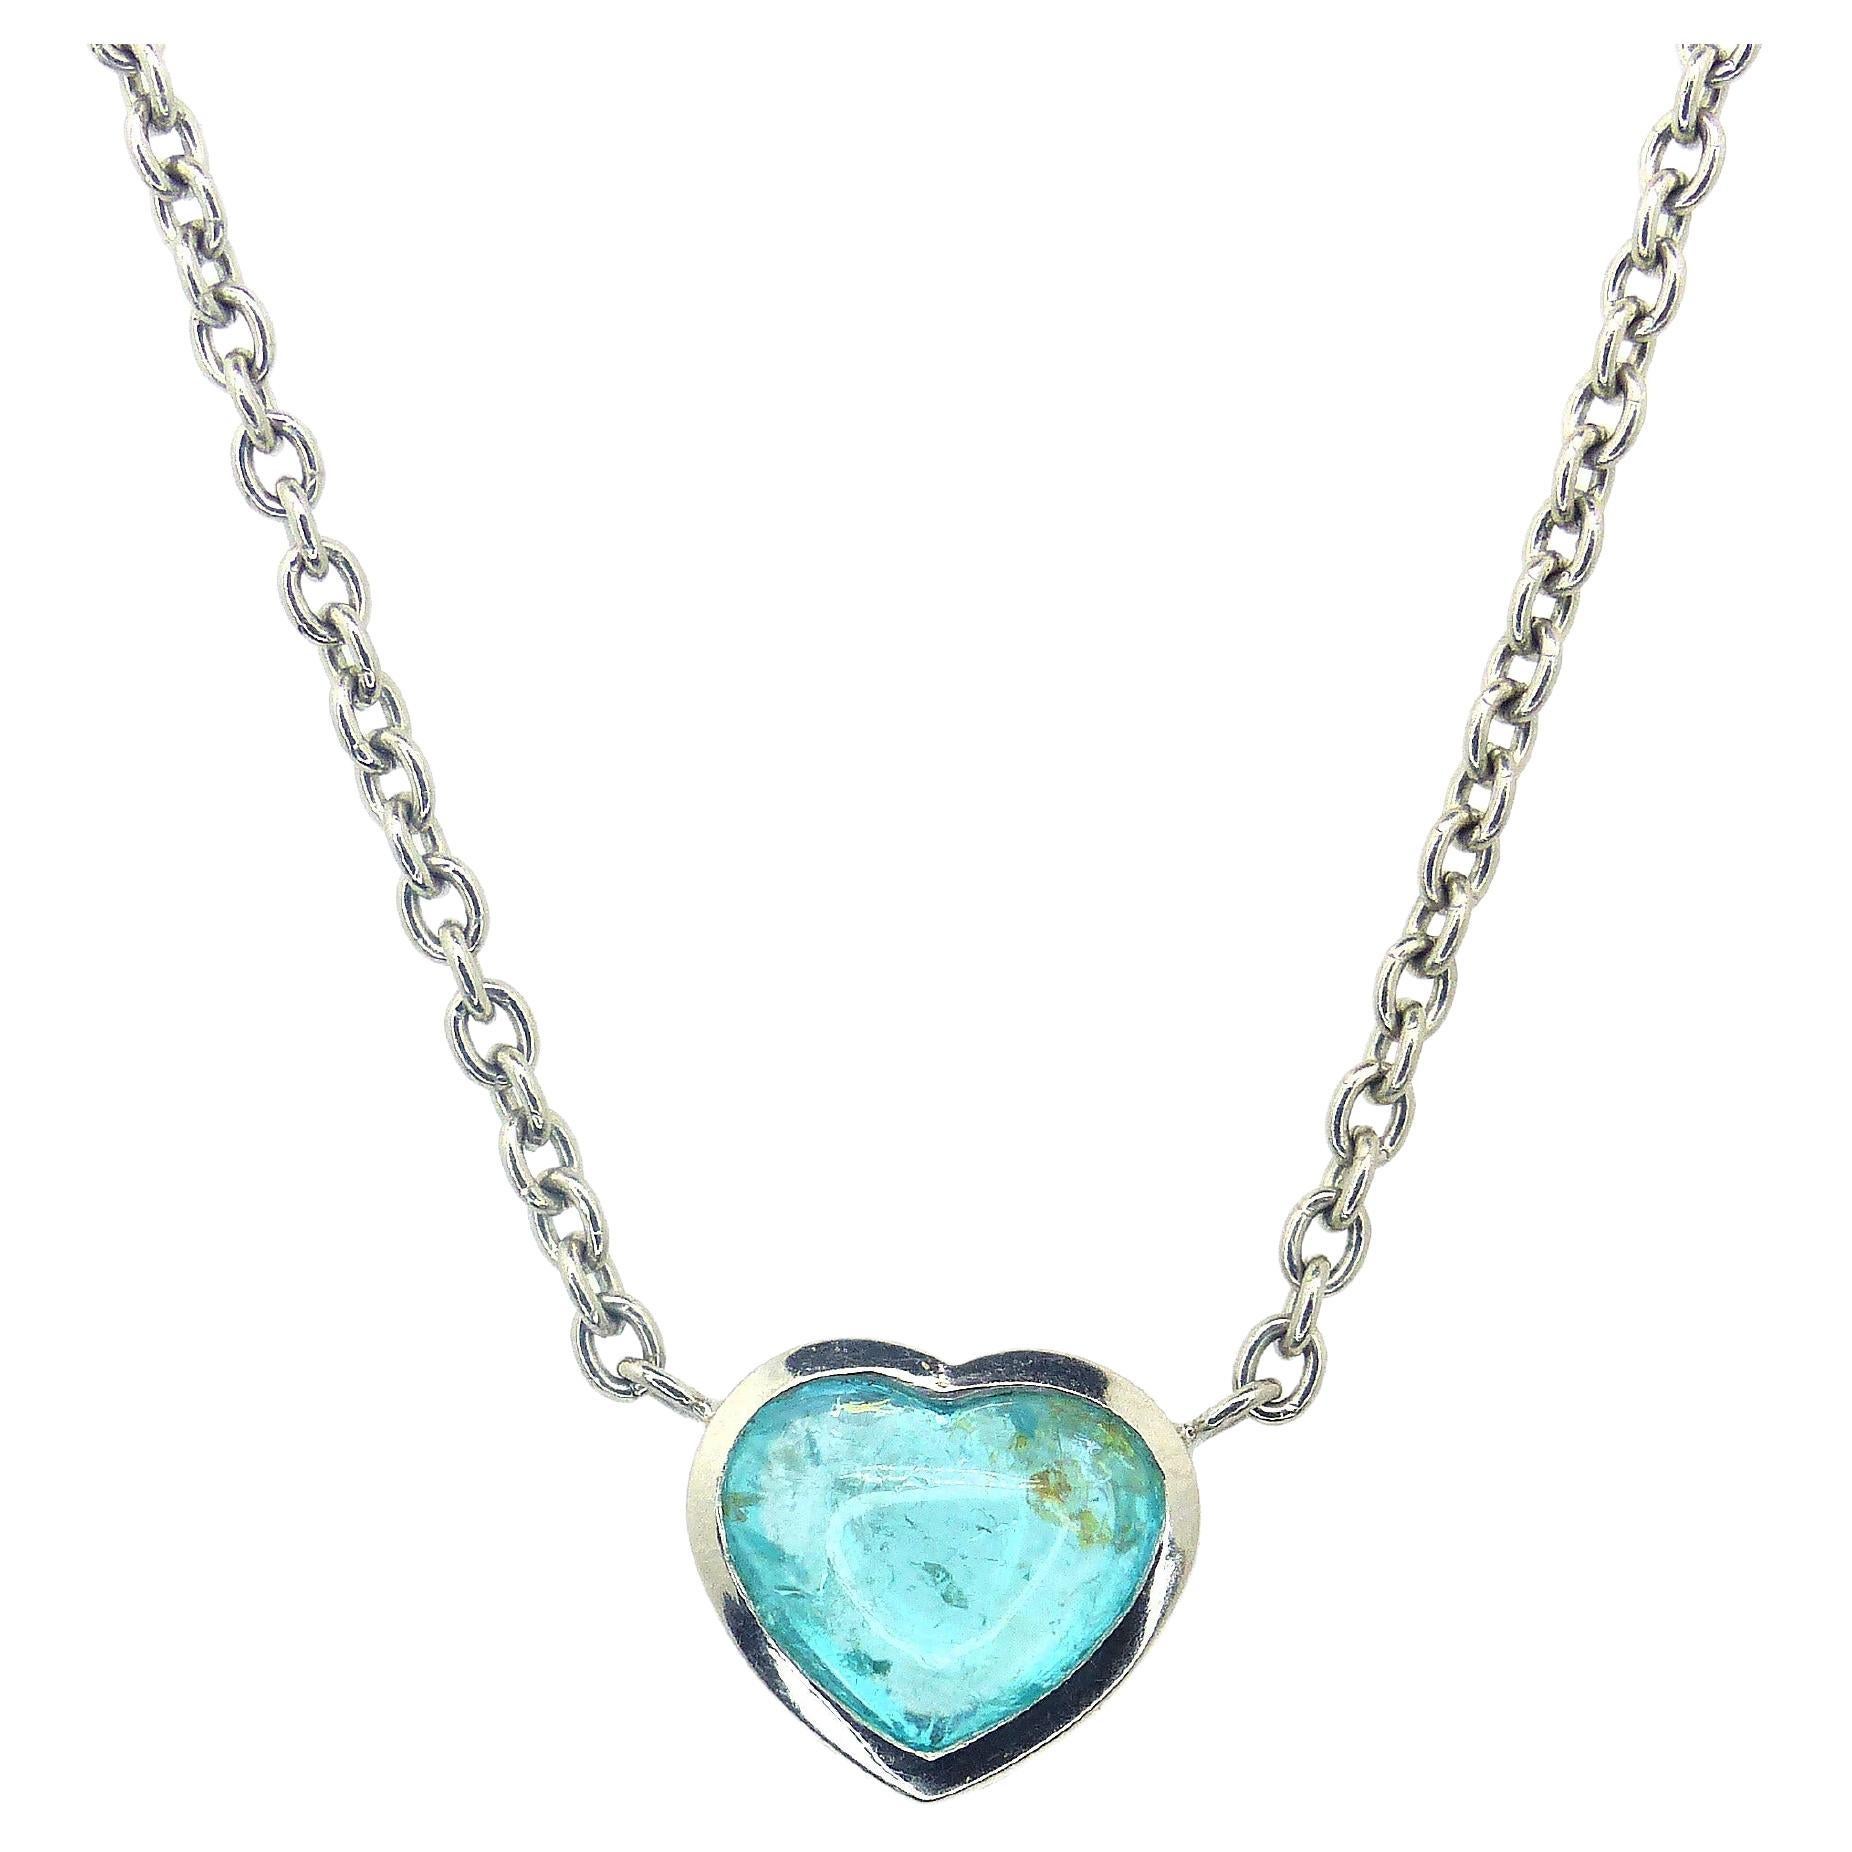 Necklace in Platinum with 1 blue/green Paraiba Tourmaline Cabouchon Heart. For Sale